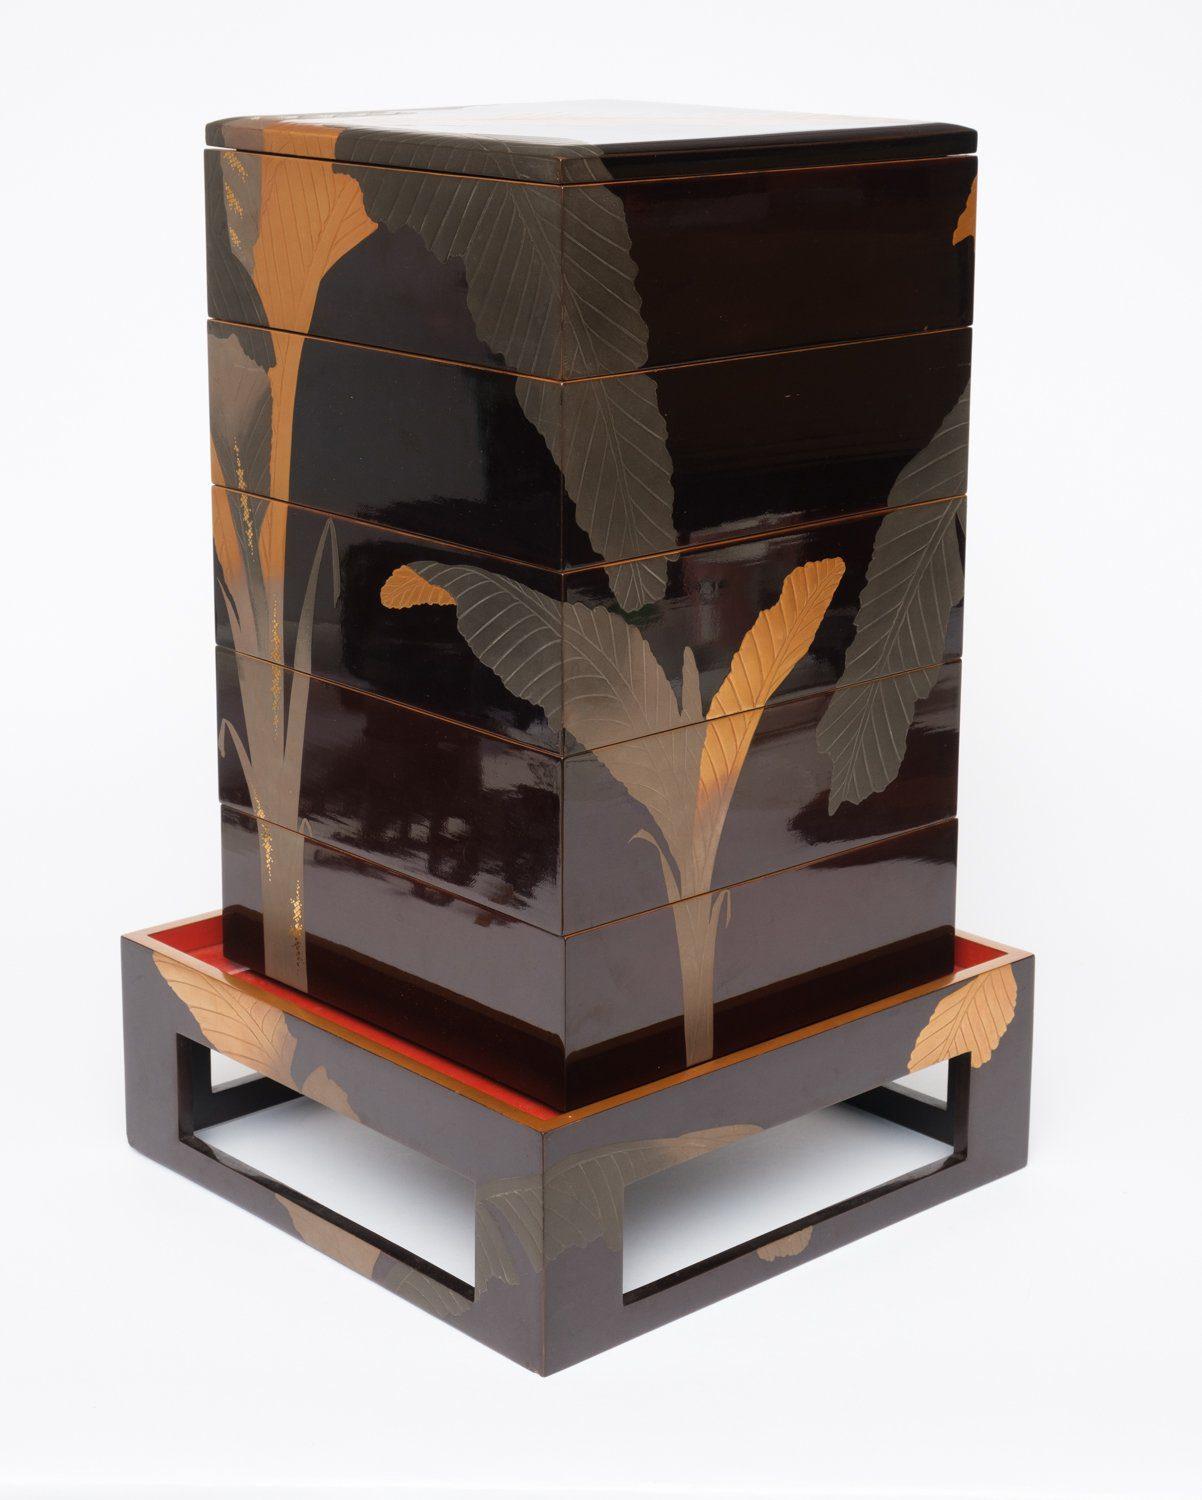 Japanese lacquered 5-tiered jûbako 重箱 (picnic box) with banana leaf design For Sale 7